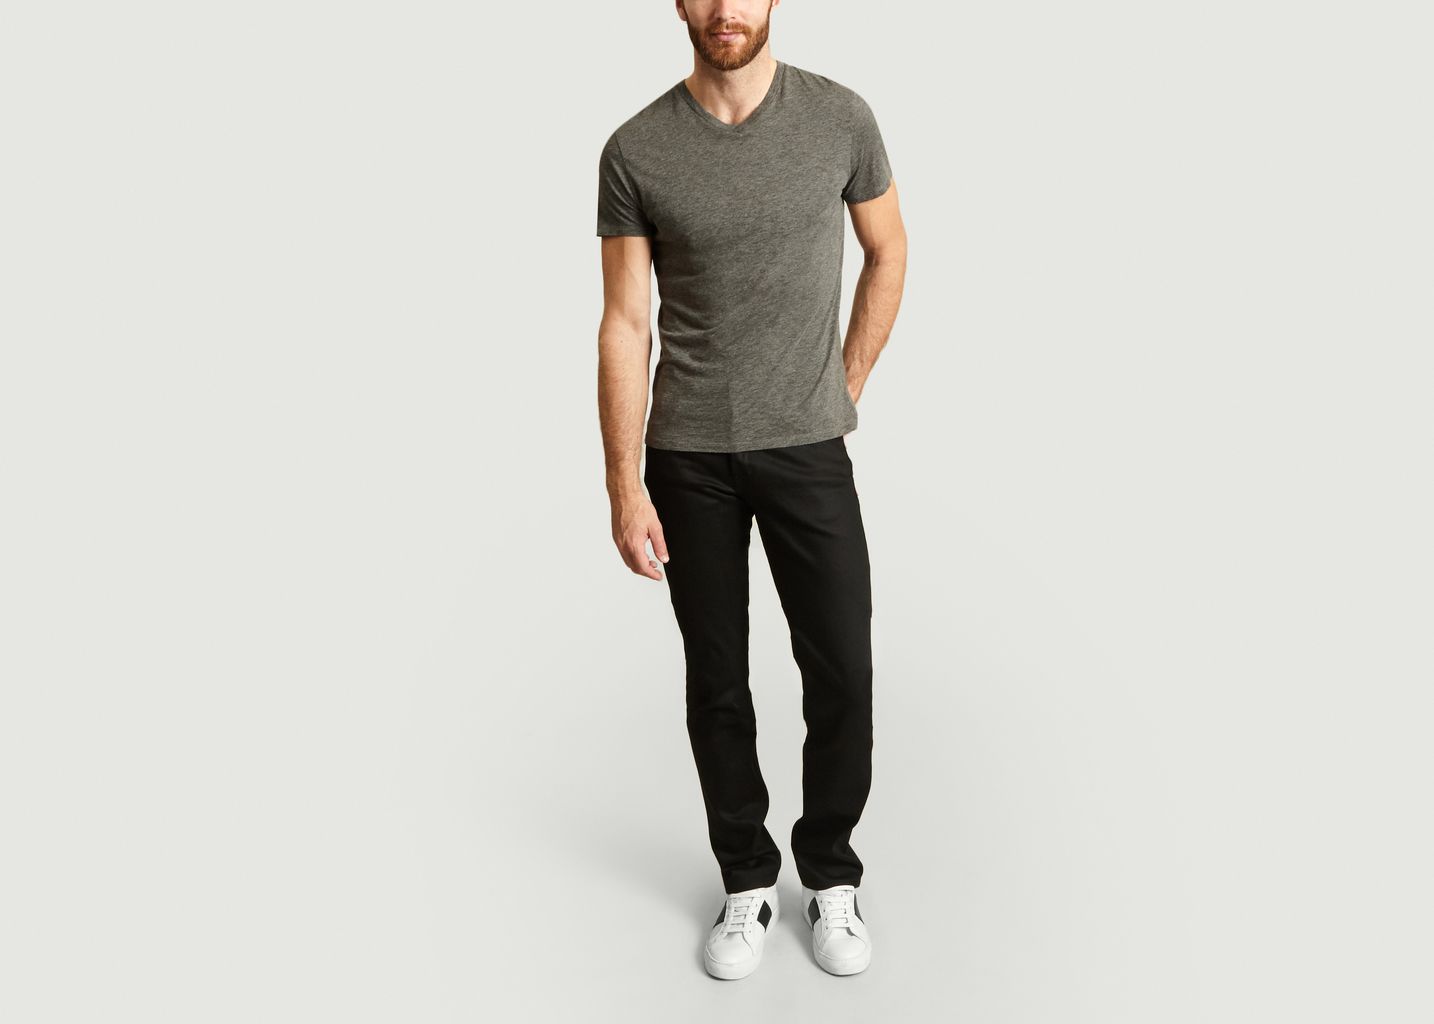 Jean Weird Guy Selvedge Cobra Stretch - Naked and Famous